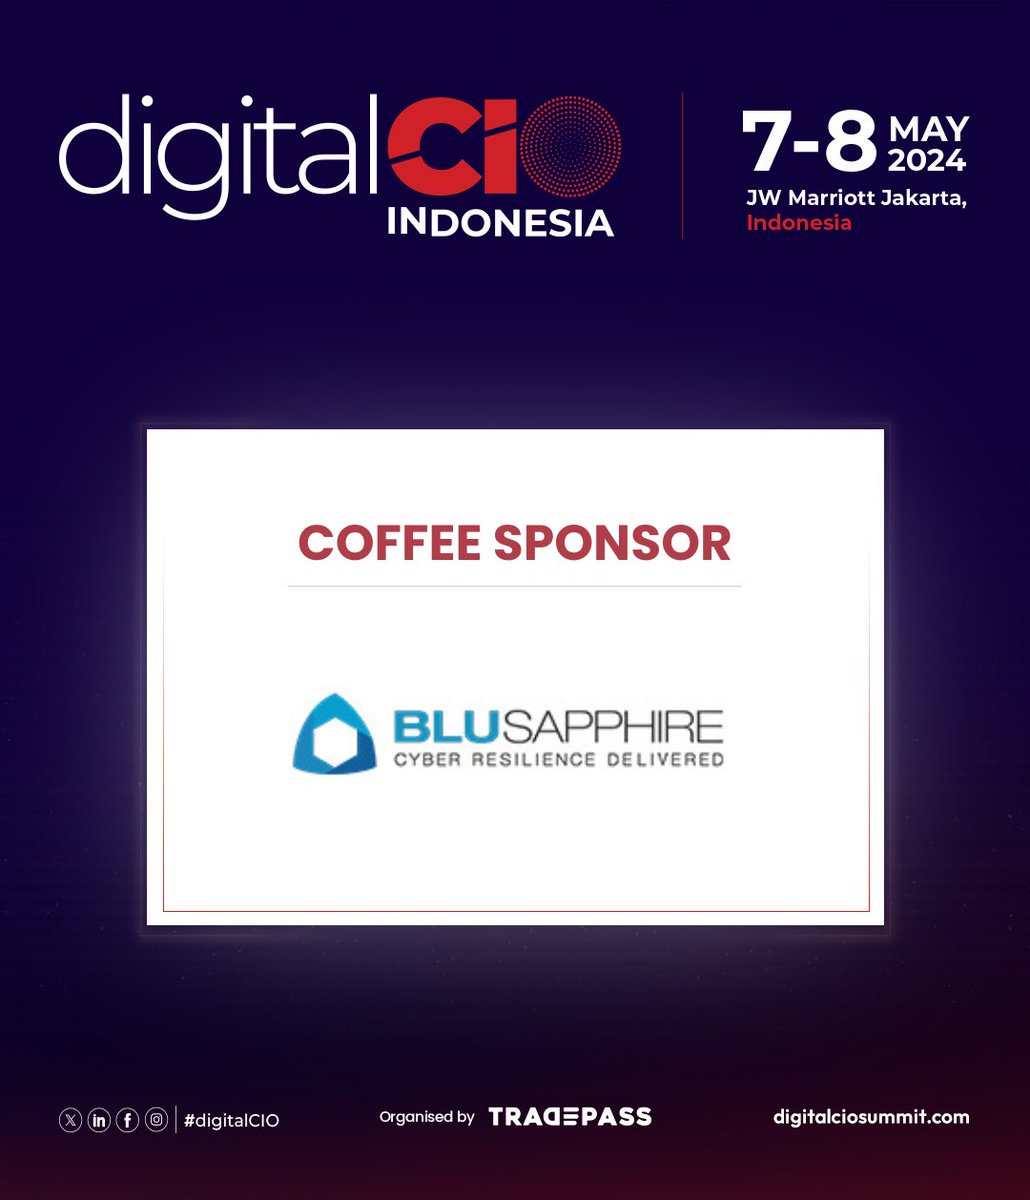 Thrilled to announce that Blusapphire has joined as the coffee sponsor for digitalCIO 2024 - Indonesia, happening on 7 - 8 May 2024, at JW Marriott Jakarta.
Don't miss out: hubs.la/Q02vtq9k0
#digitalCIO #CIO #ITleaders #tradepass #data #AI #greentech #cybersecurity